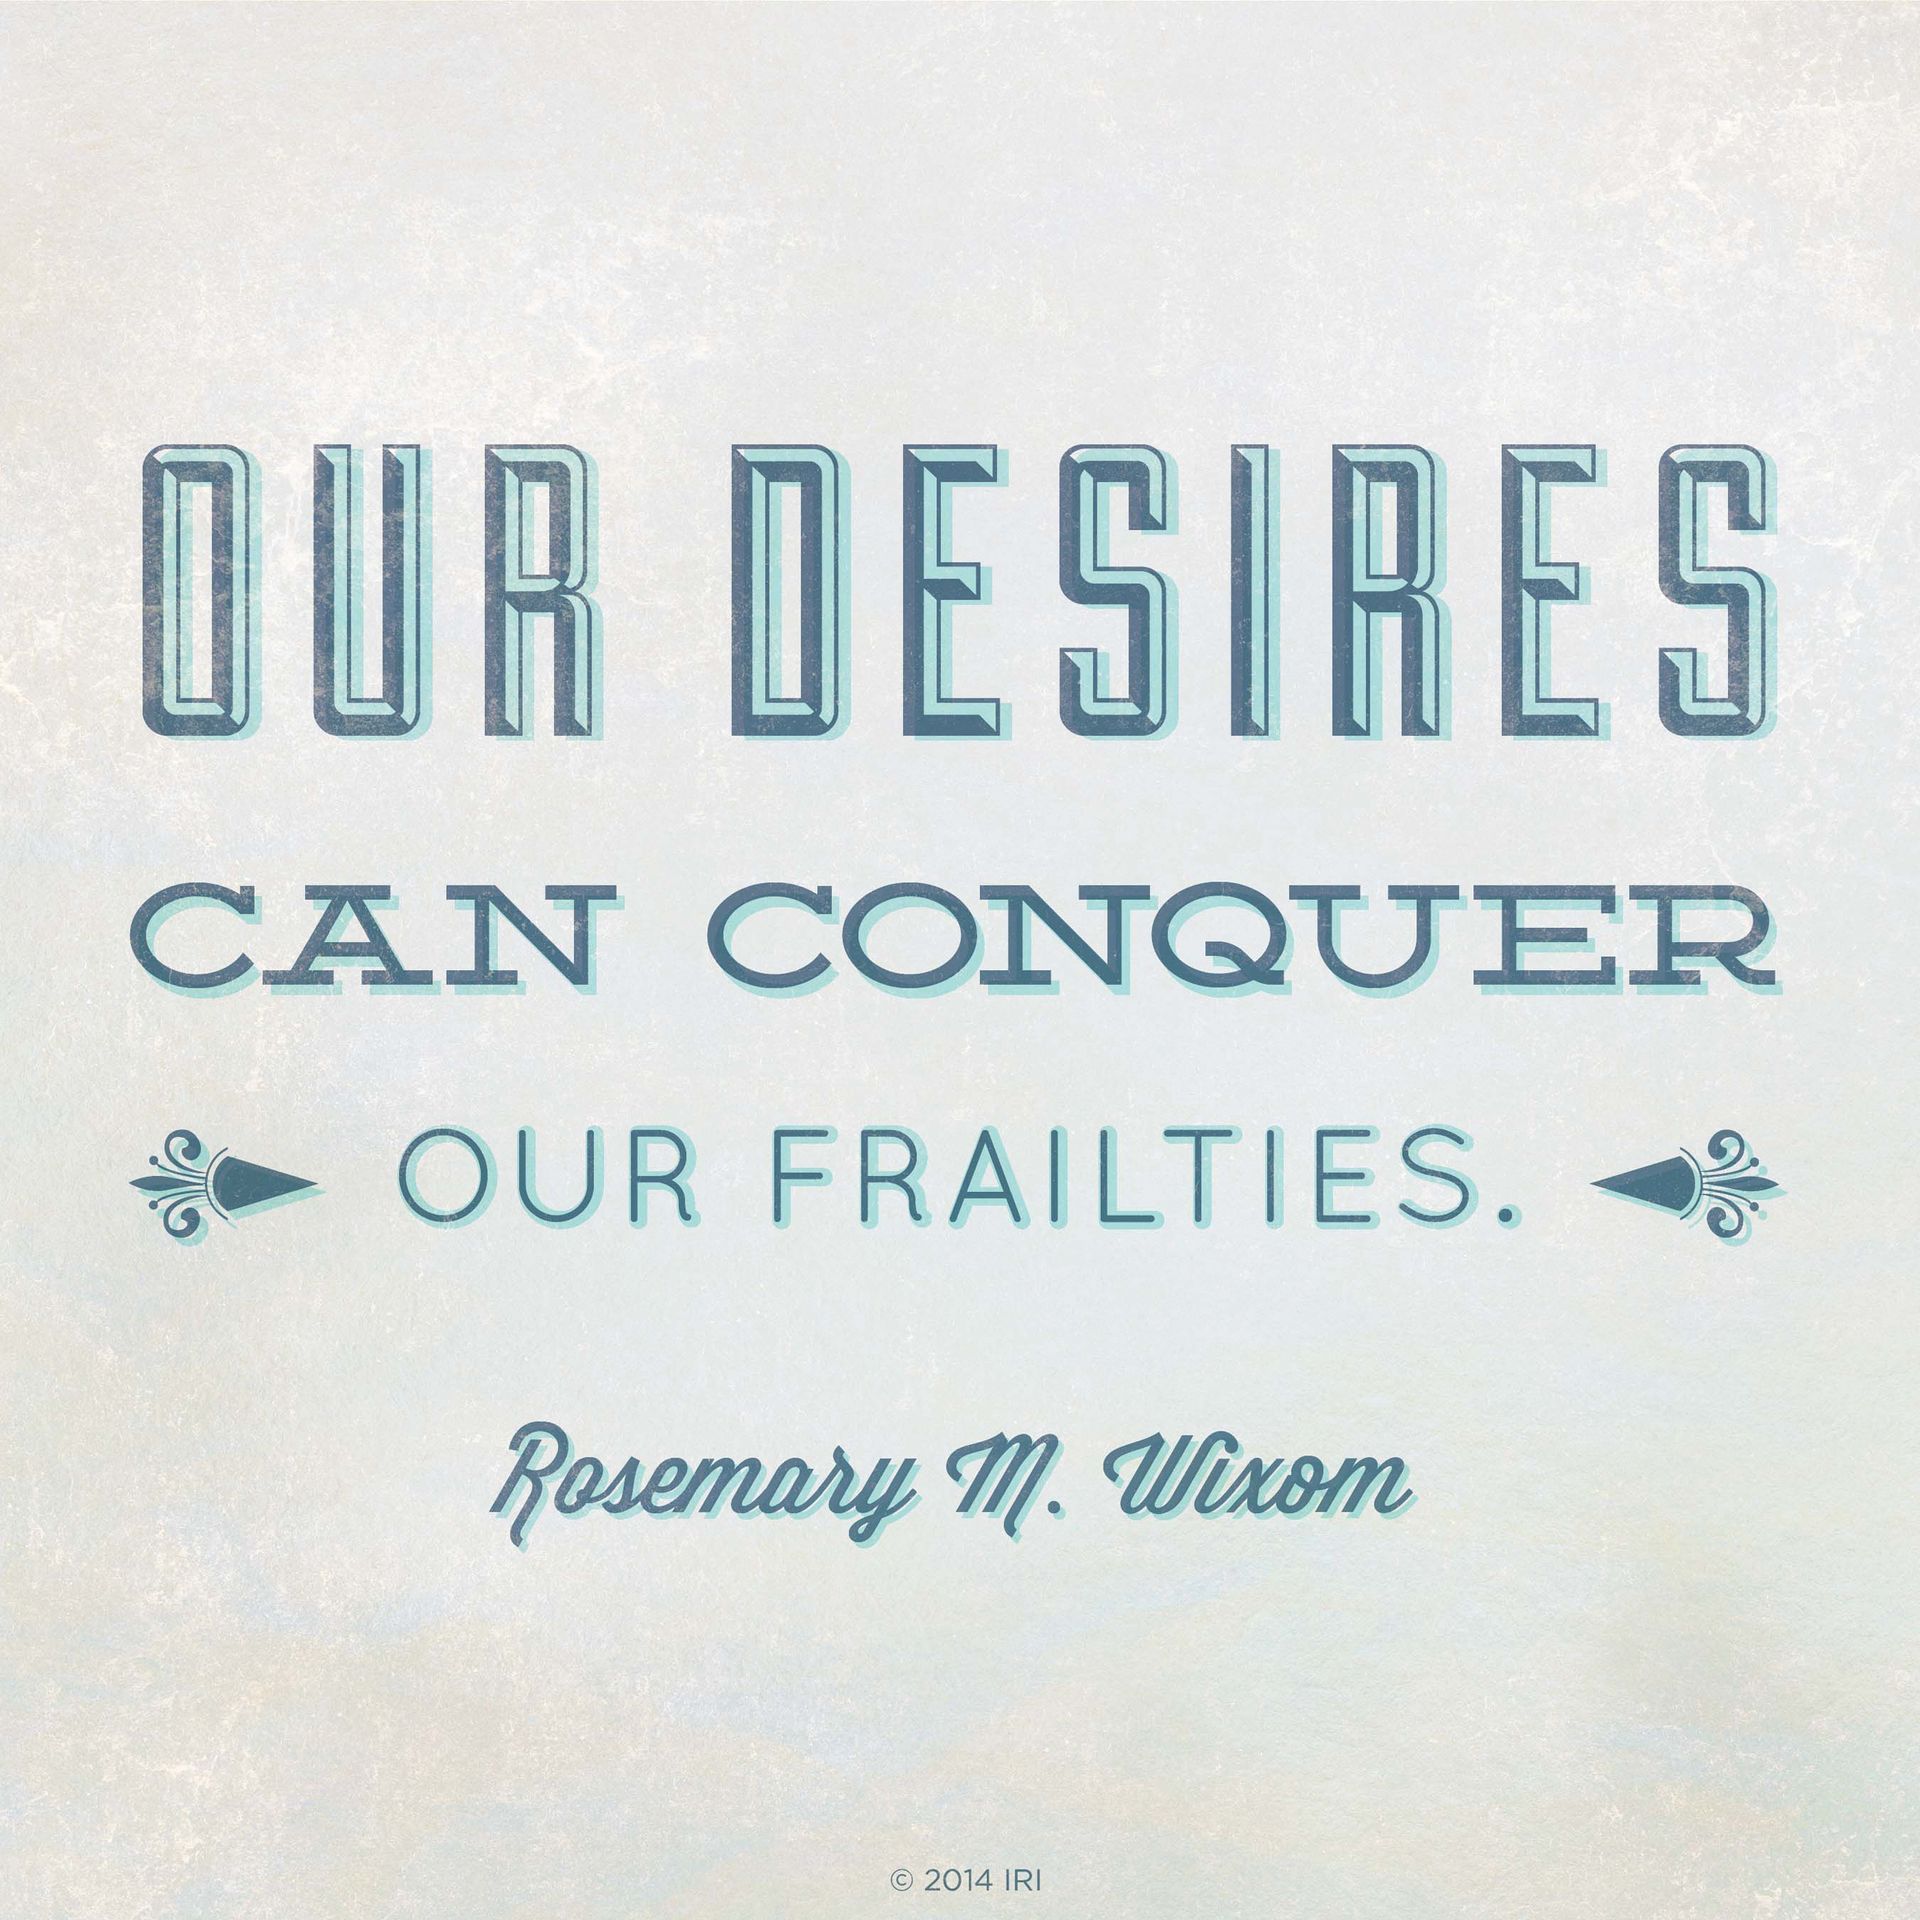 “Our desires can conquer our frailties.”—Sister Rosemary M. Wixom, “Coming to Know”